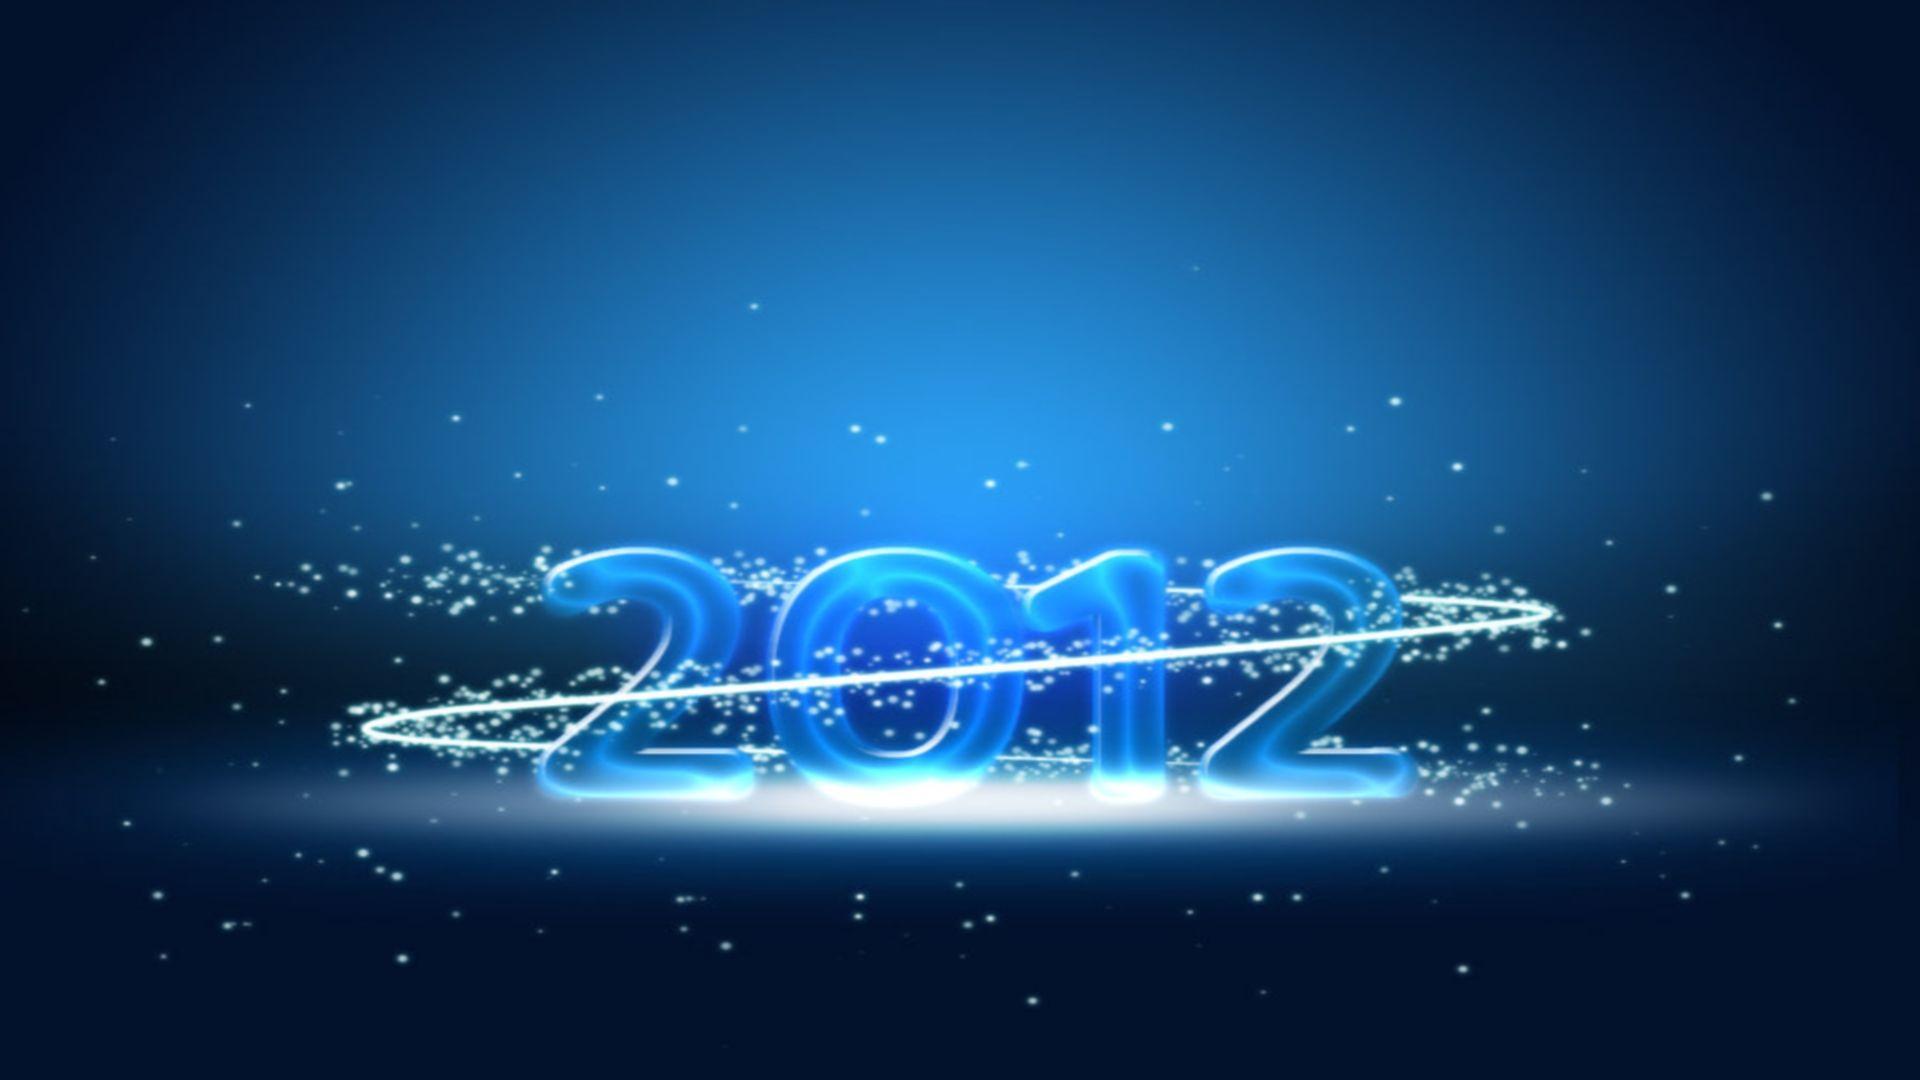 Happy New Year 2012 HD Wallpaper. I Have A PC